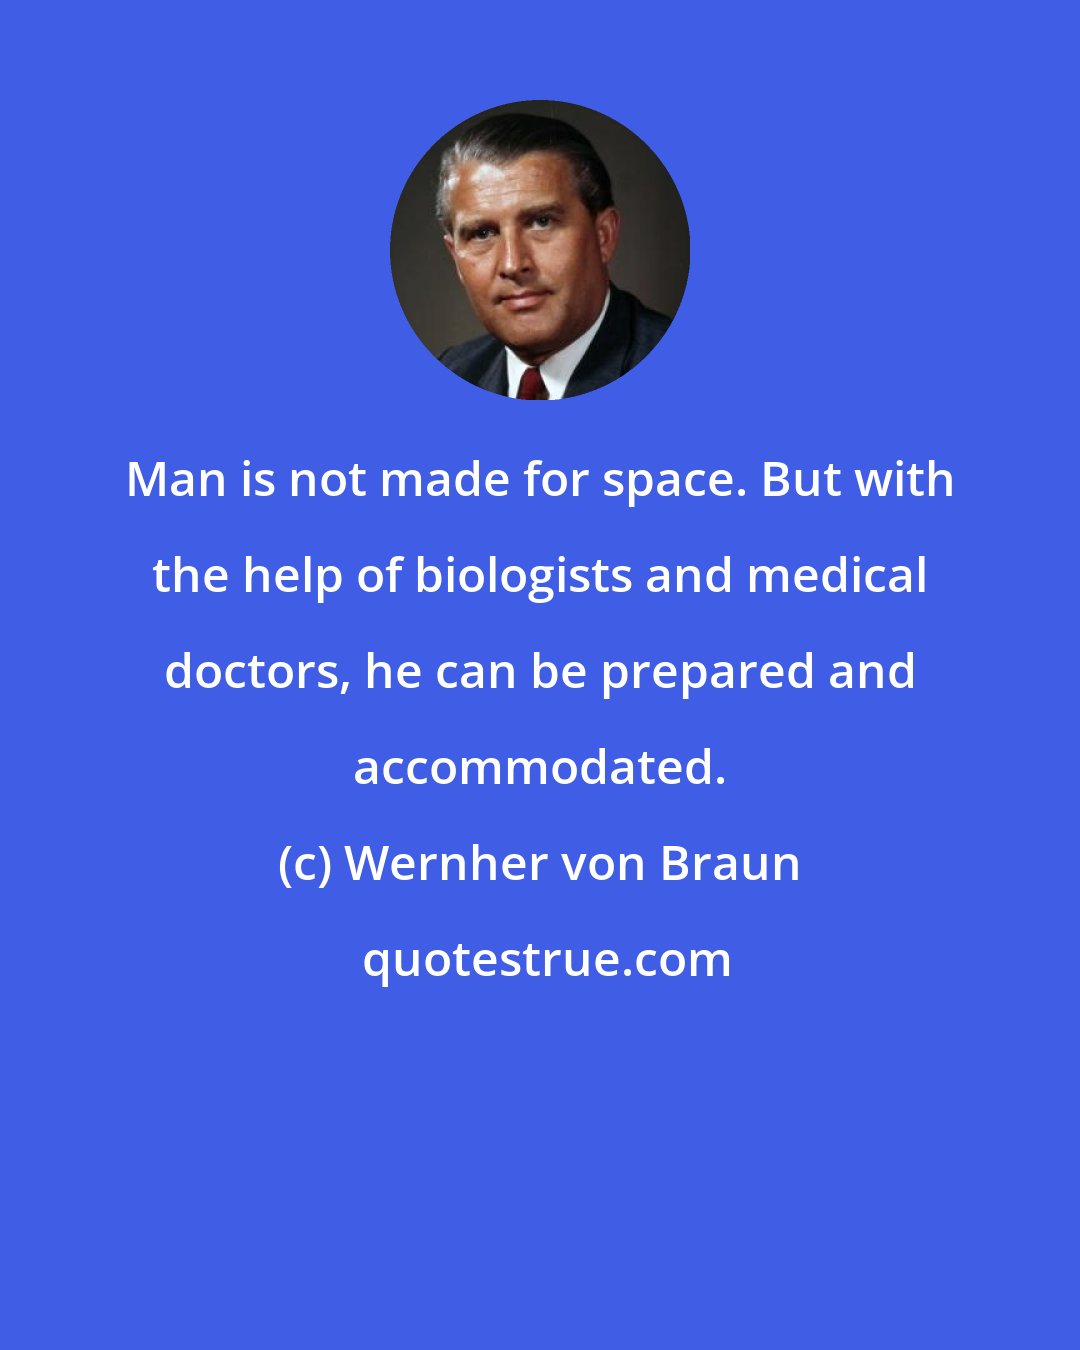 Wernher von Braun: Man is not made for space. But with the help of biologists and medical doctors, he can be prepared and accommodated.